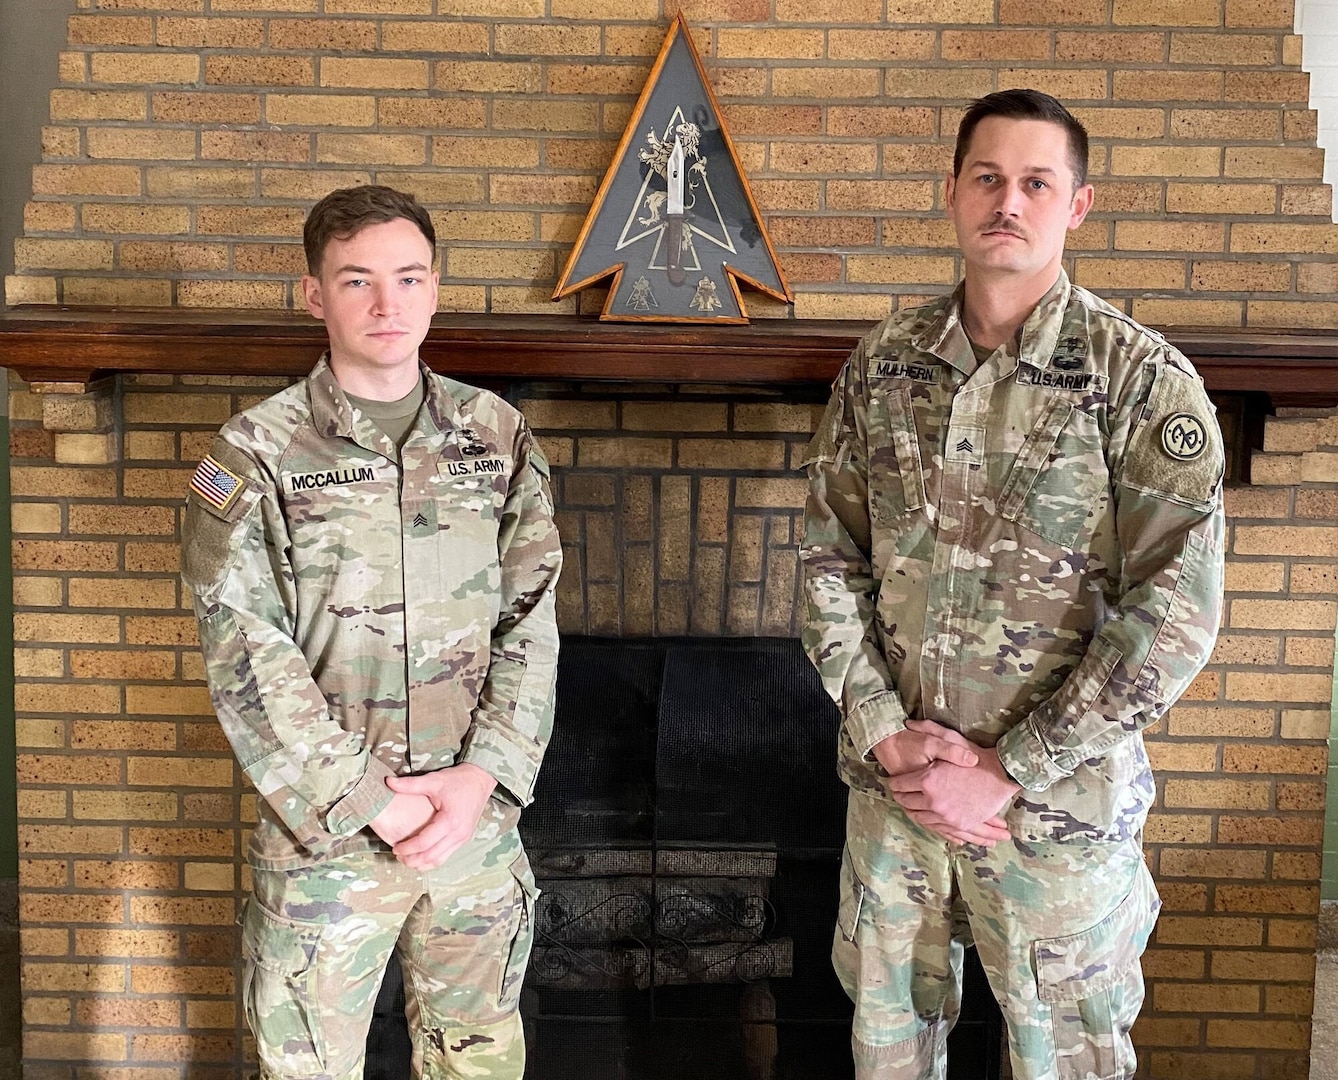 New York Army National Guard Sgts. Klayton McCallum, left, and Thomas Mulhern, both medics in the 2nd Battalion, 108th Infantry, will represent the Army National Guard during the Army's Best Medic Competition at Fort Polk, Louisiana, Jan. 23-27, 2023. The two are shown Jan. 12 at the headquarters of the 2nd Battalion, 108th Infantry in Utica, New York.